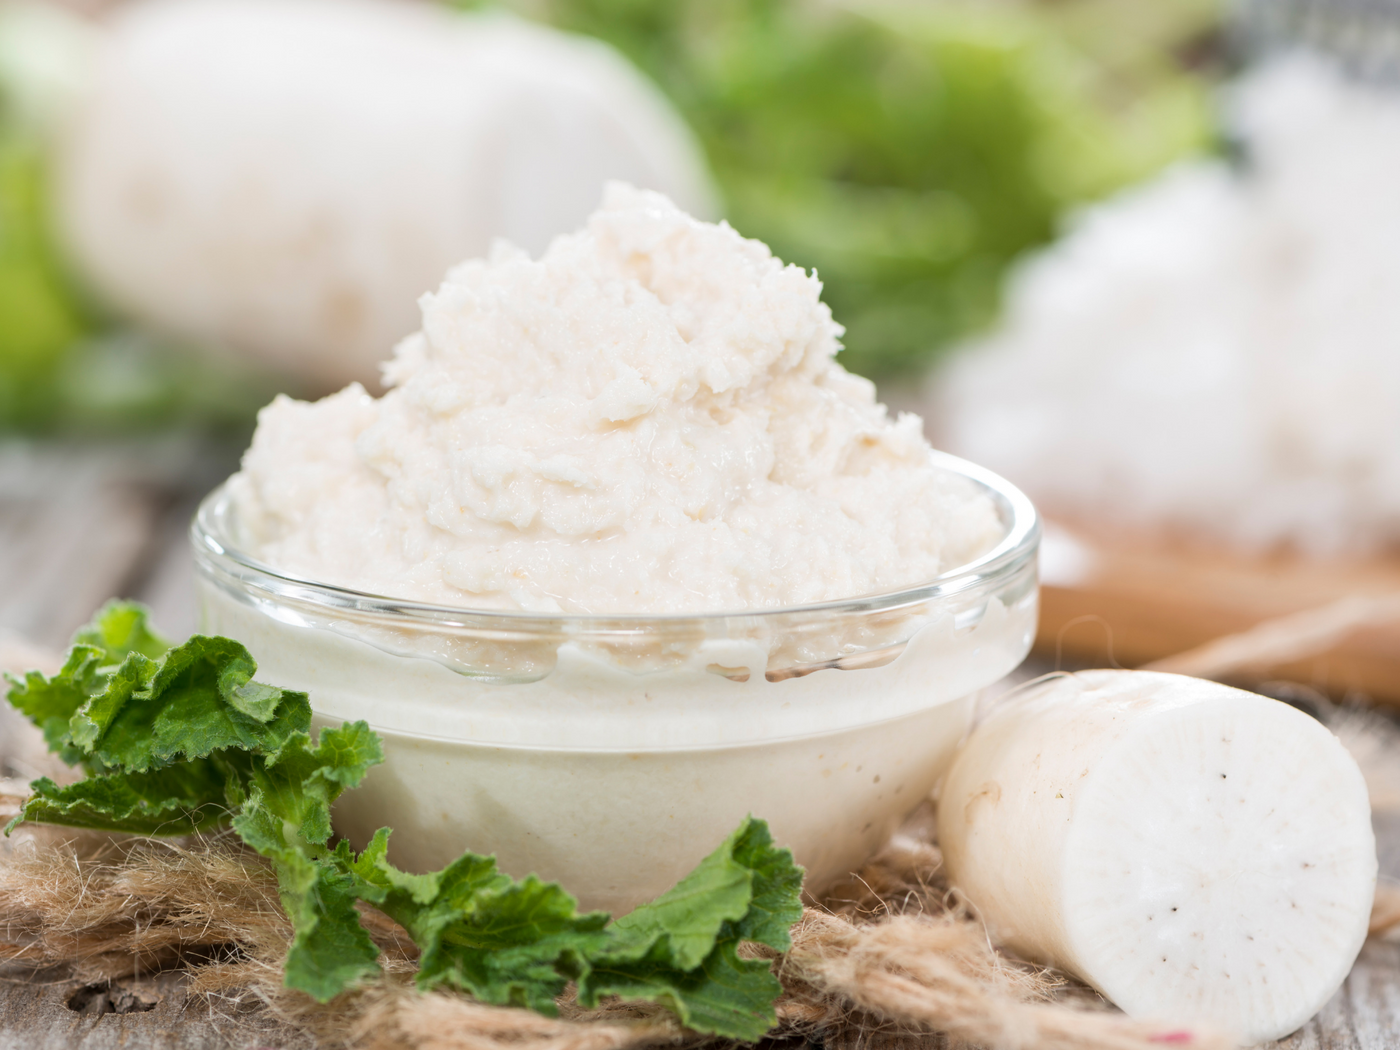 Horseradish – The Potent, Pungent Root Vegetable